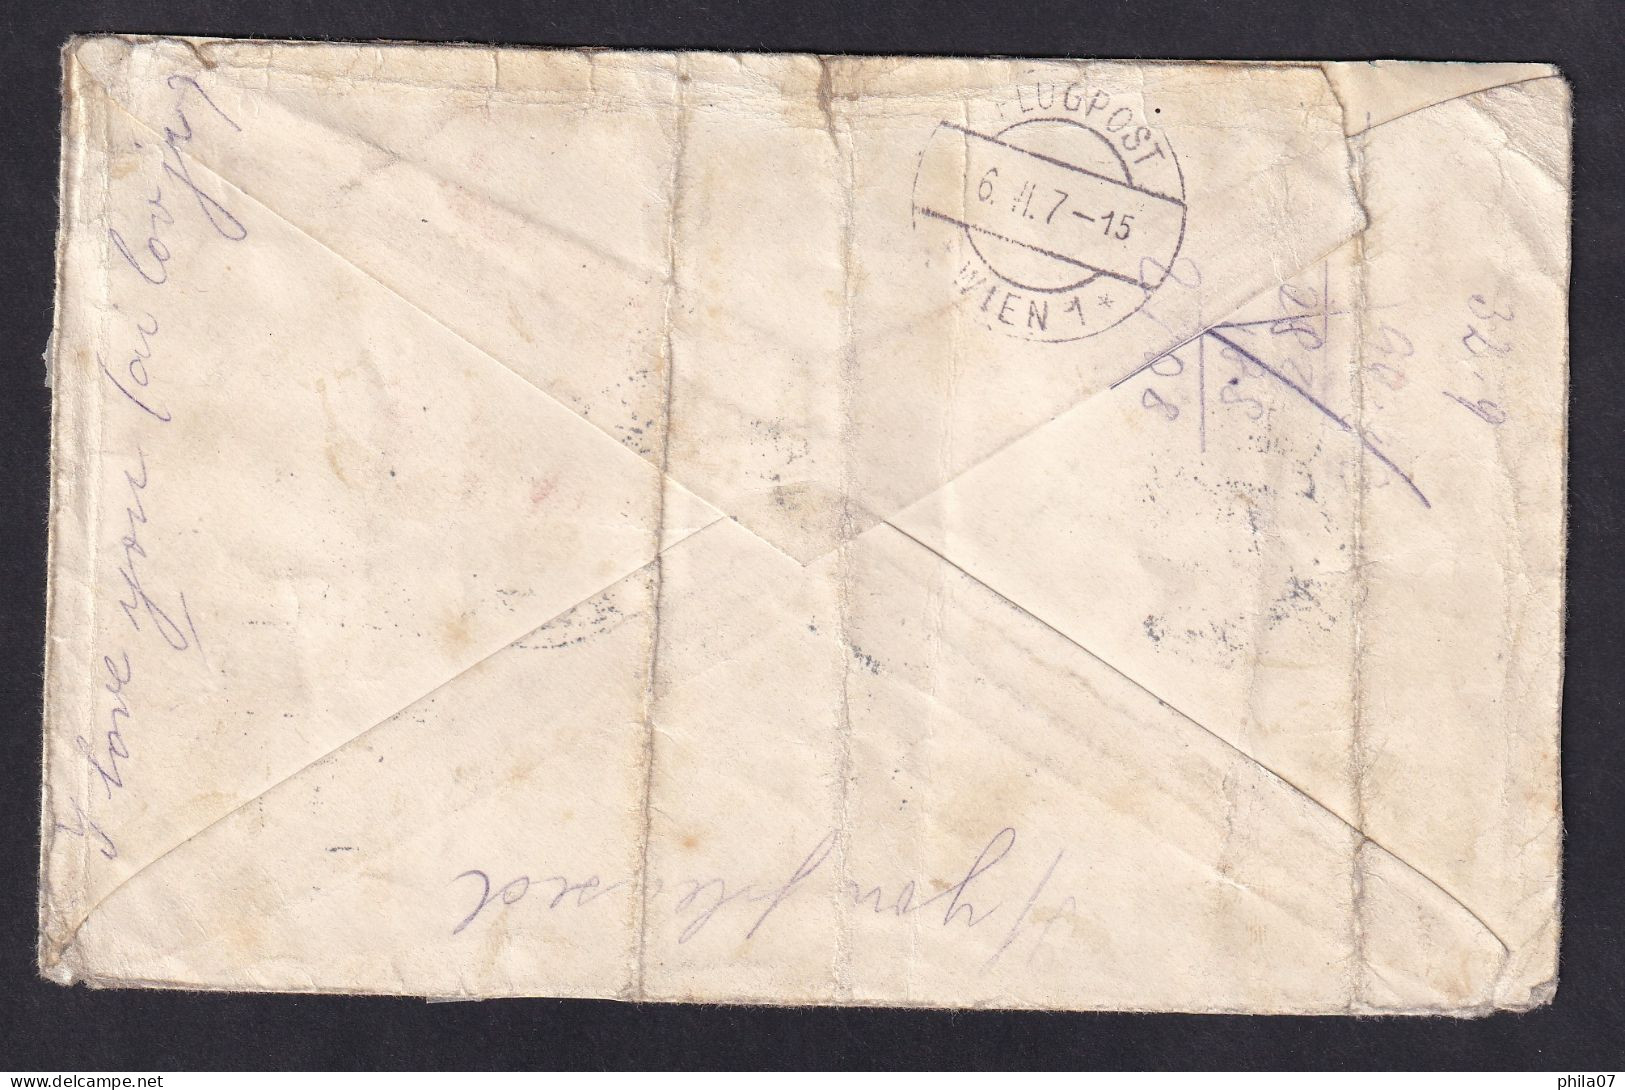 AUSTRIA - Letter Sent By Airmail From Krakow To Wien 06.06.1915. Rare Envelope And In Poorer Quality. / 2 Scans - Covers & Documents